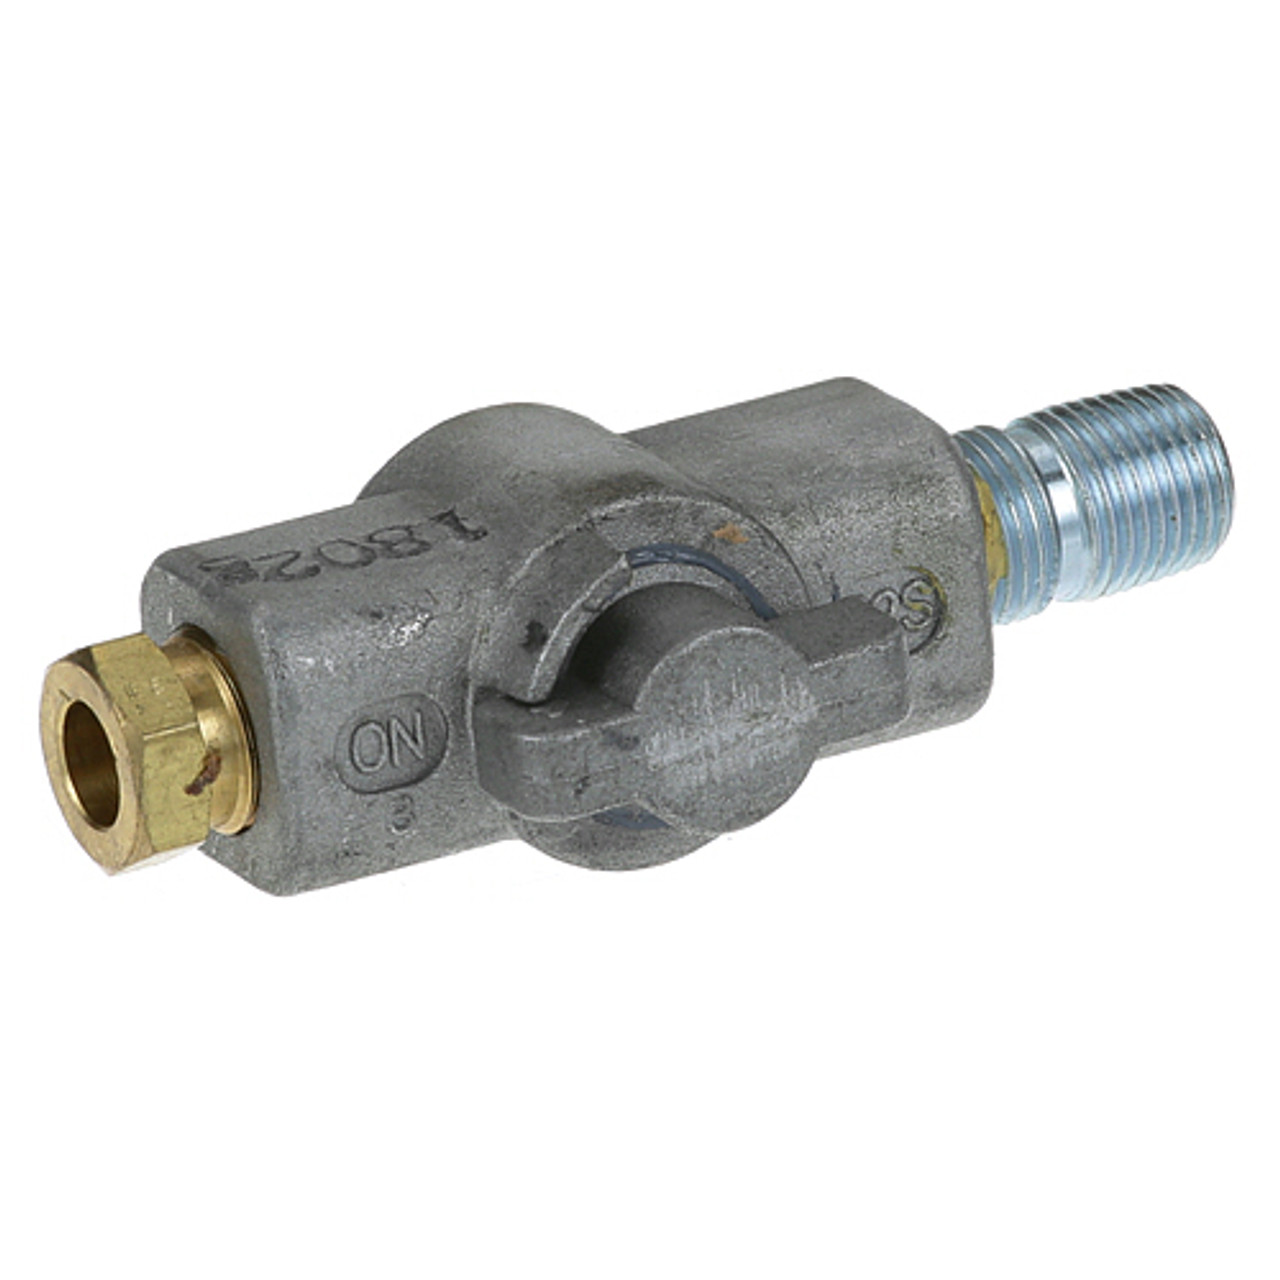 Valve, Gas - Pilot - Replacement Part For Keating P15427L